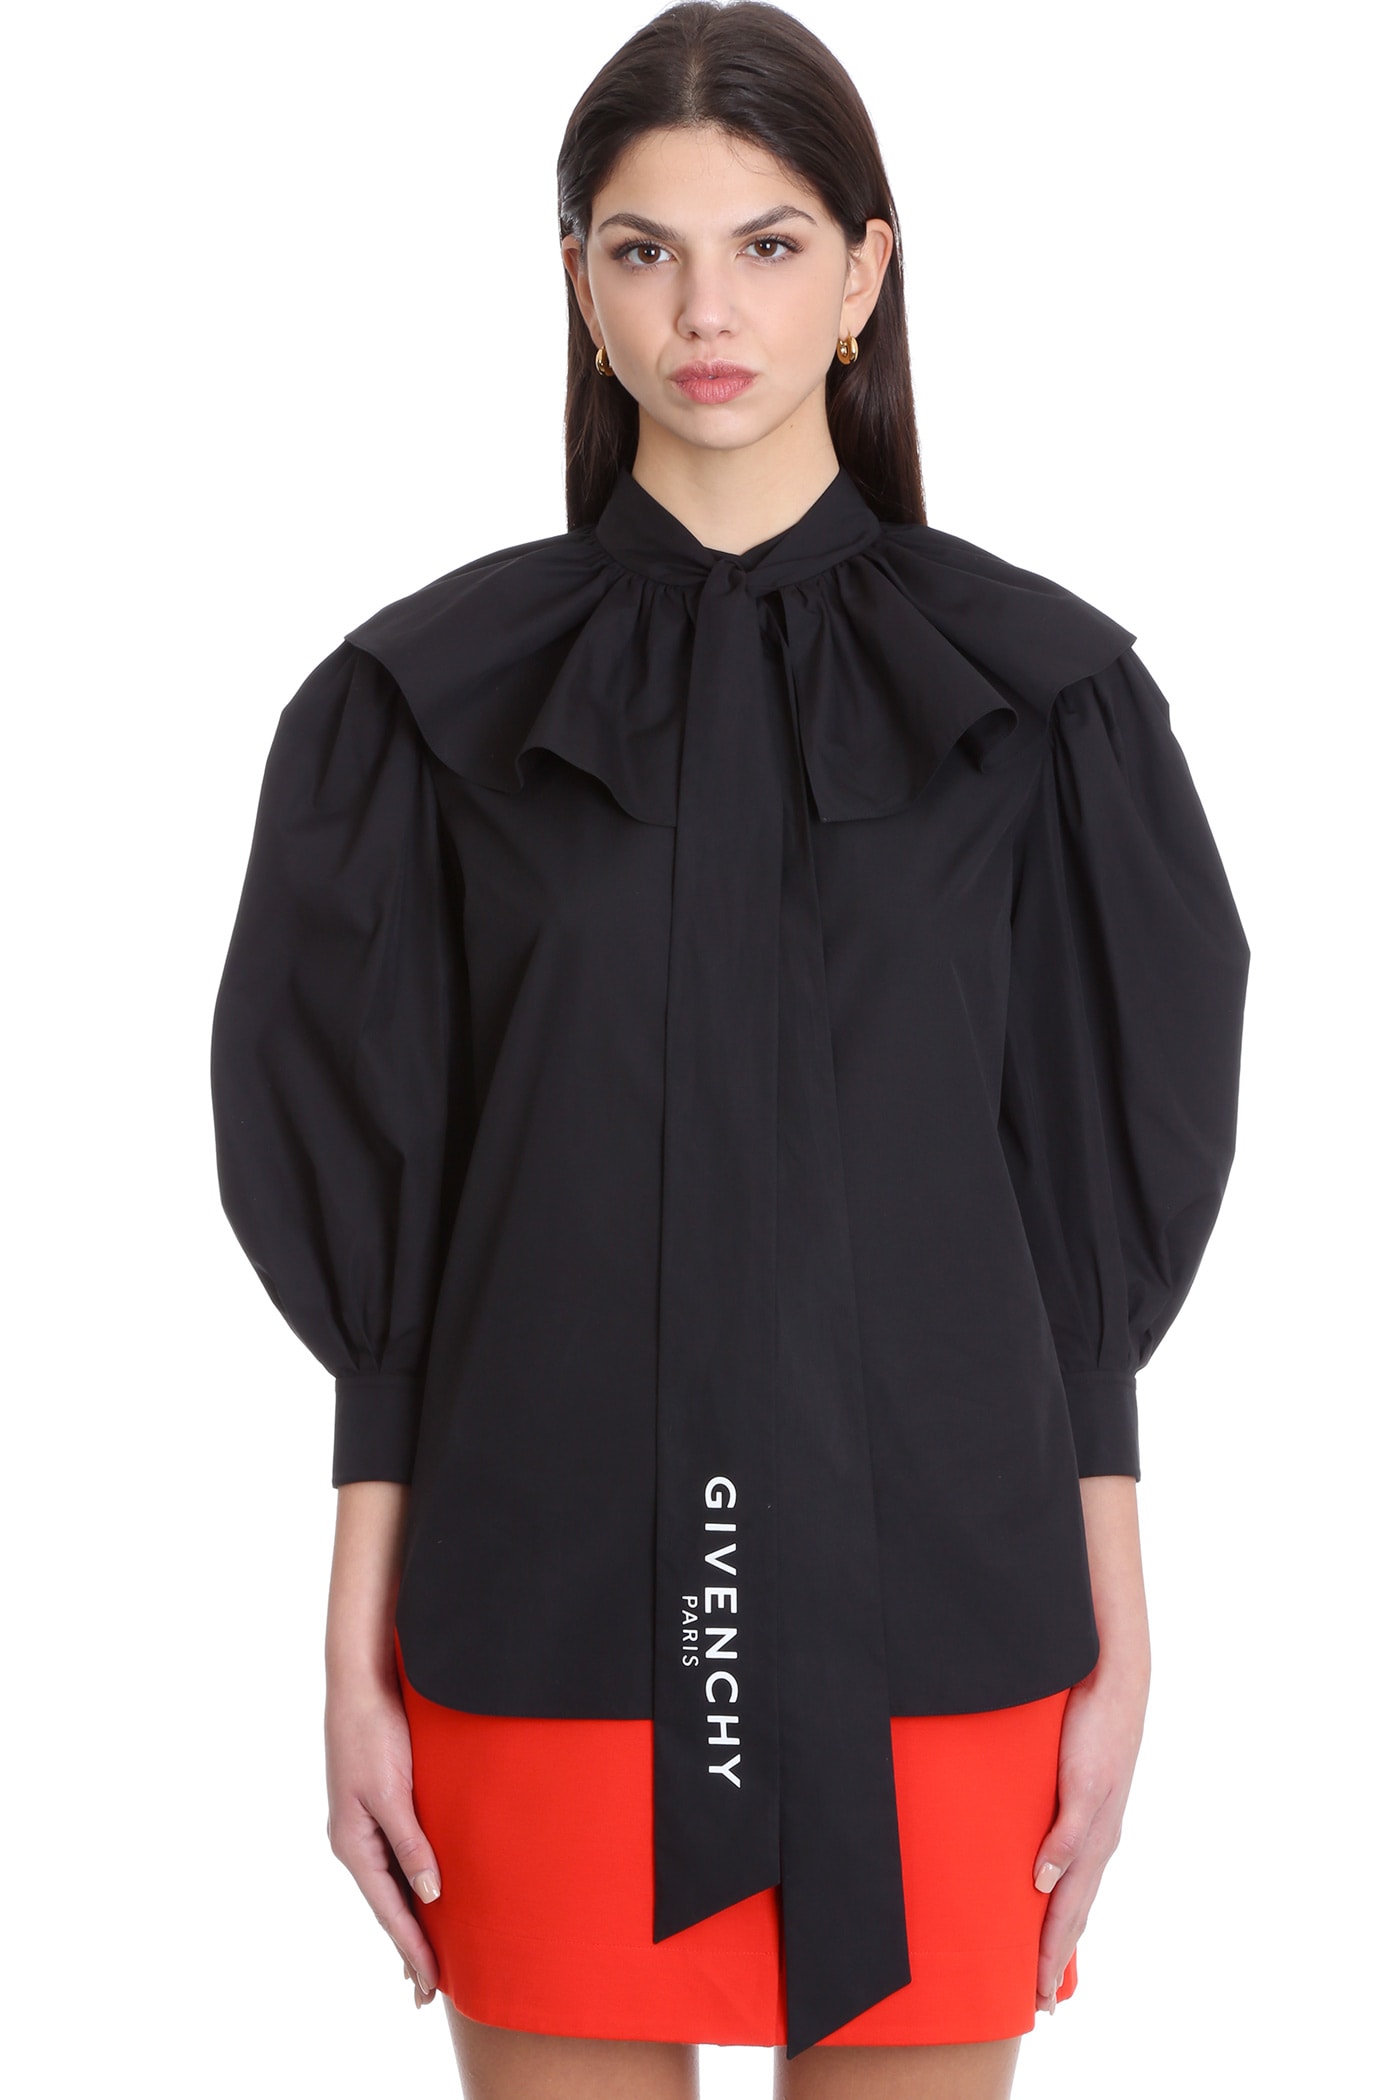 Givenchy SHIRT IN BLACK COTTON